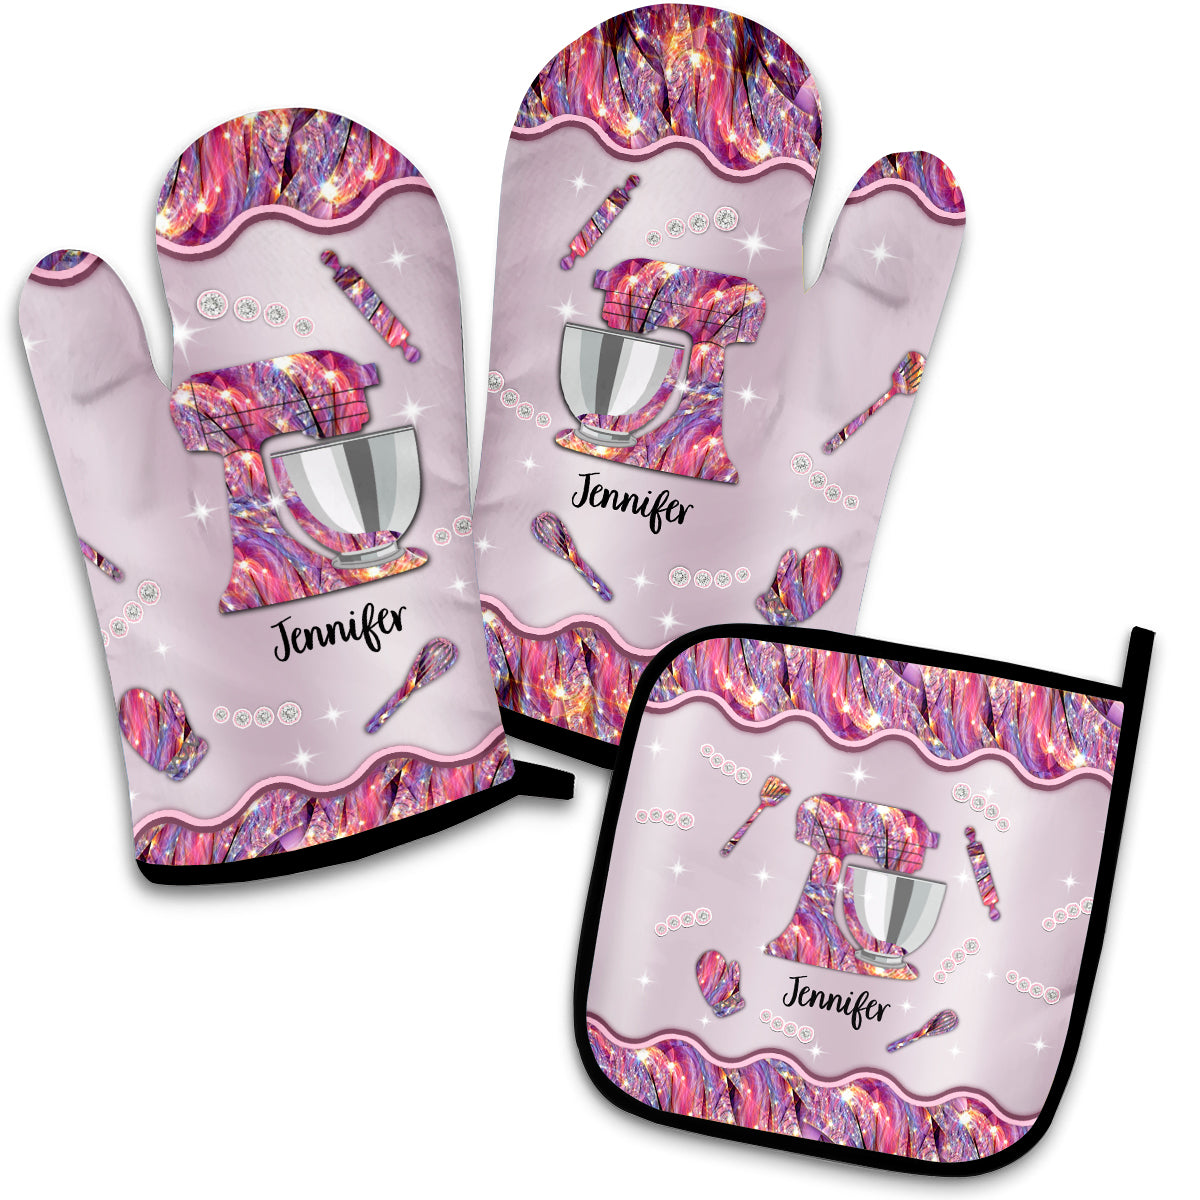 Custom Microwave Oven Mitts And Pot Holders Sets Personalized